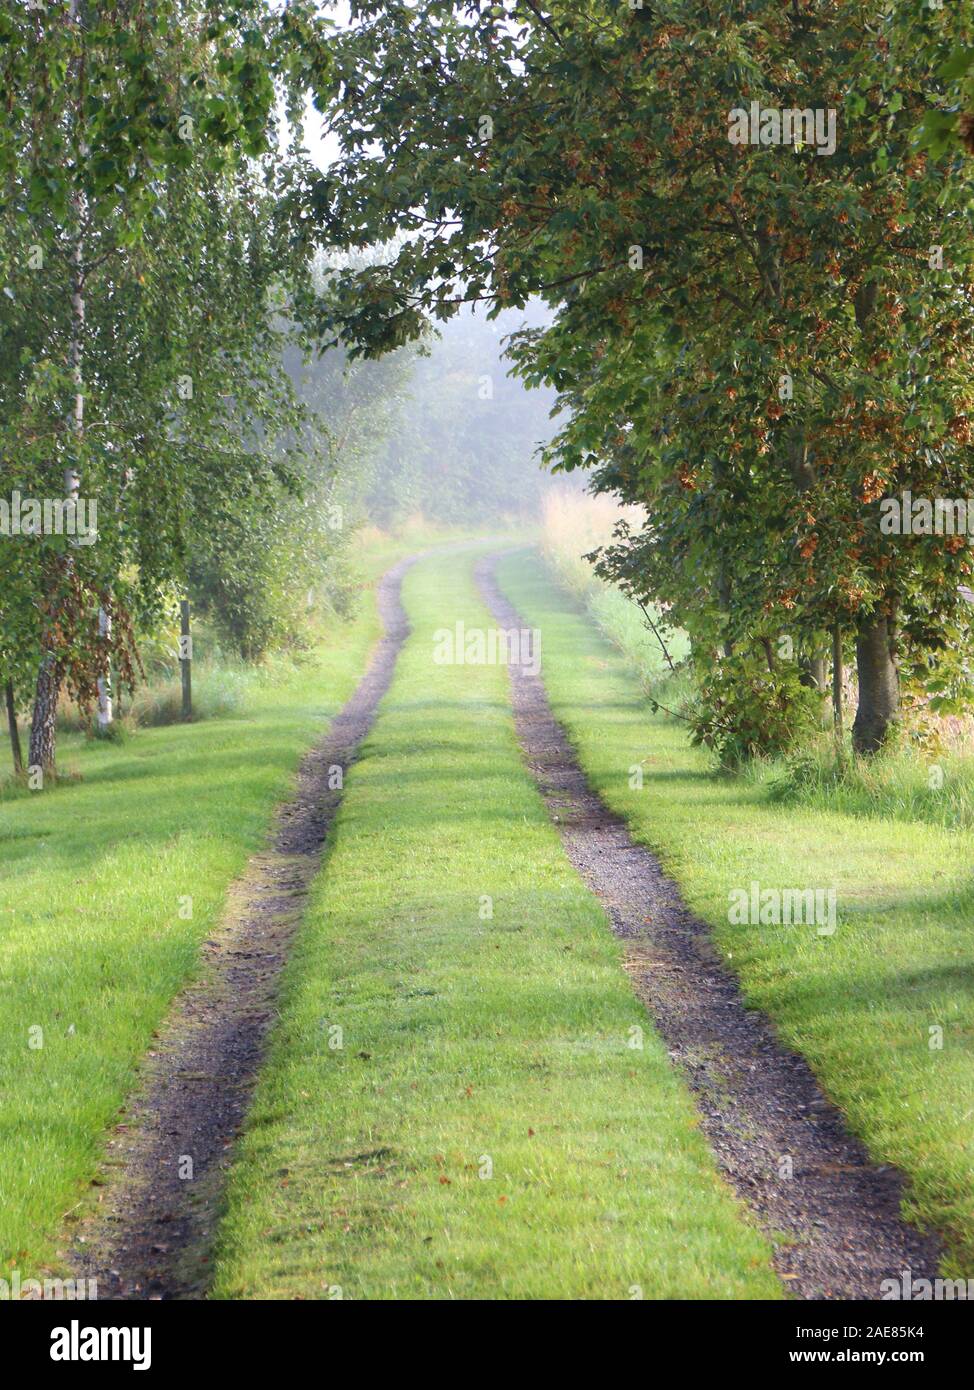 Rural Gravel Green Road with Fresh Morning Mist. The Auto Car Tractor Trails are diminishing at distance. Photo shot in the early morning on the Islan Stock Photo